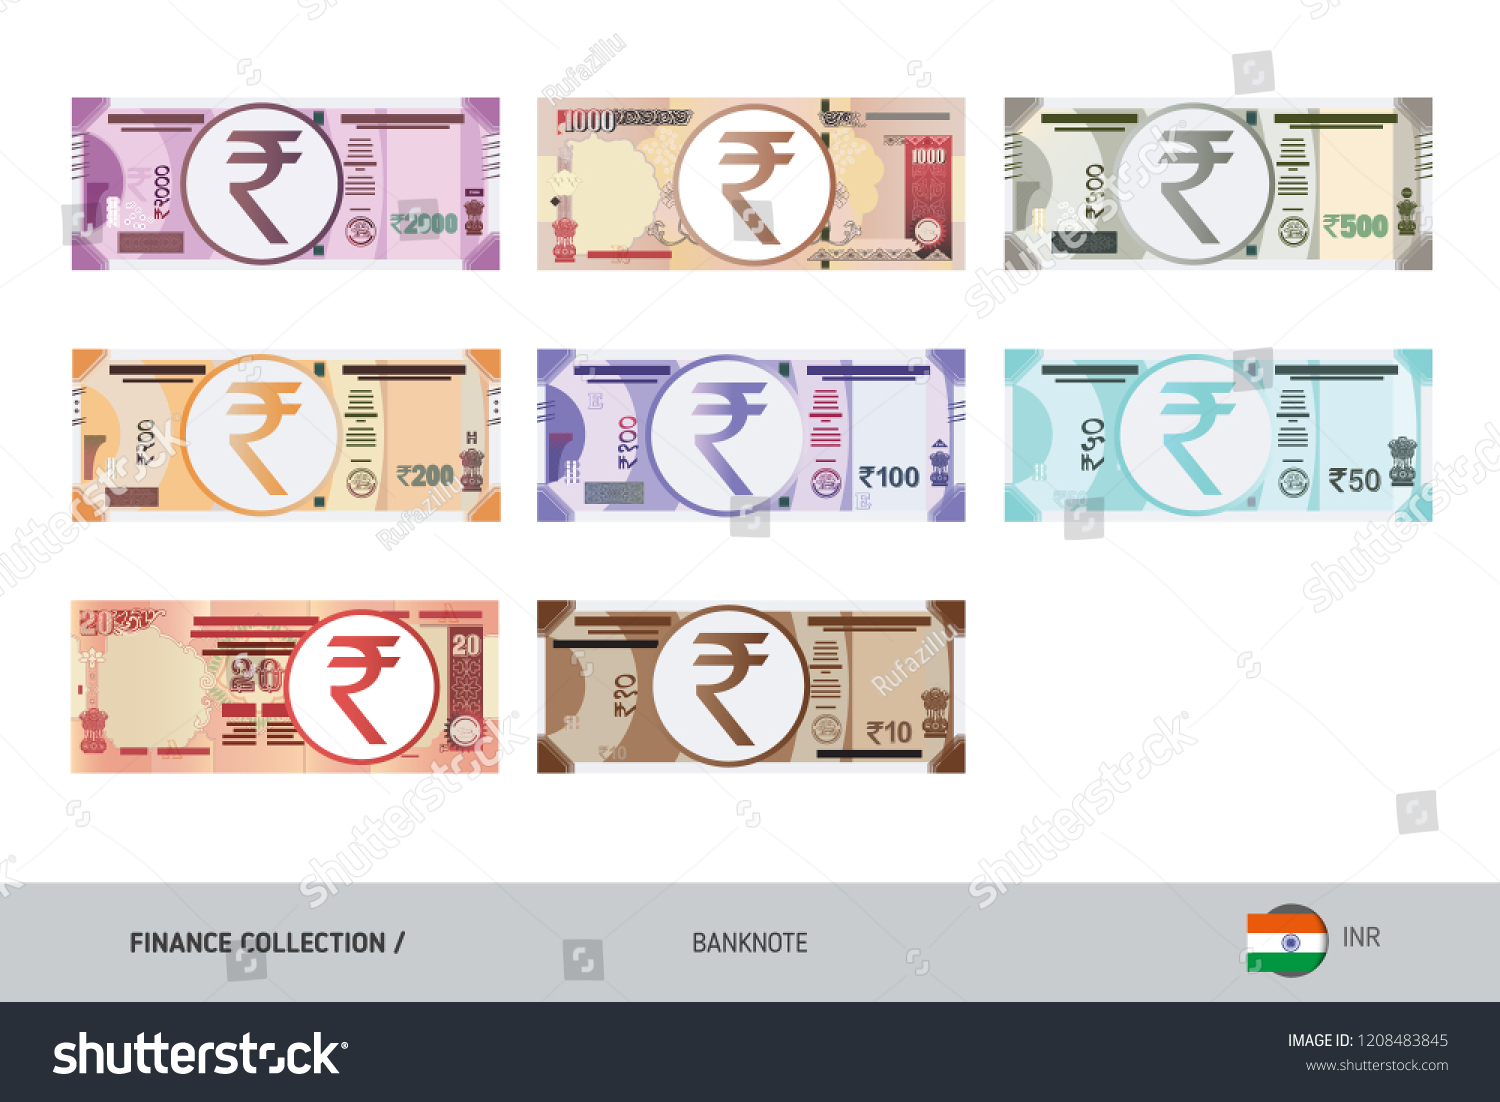 SVG of Rupee Banknotes set. Flat style highly detailed vector illustration. Isolated on white background. Suitable for print materials, web design, mobile app and infographics. svg